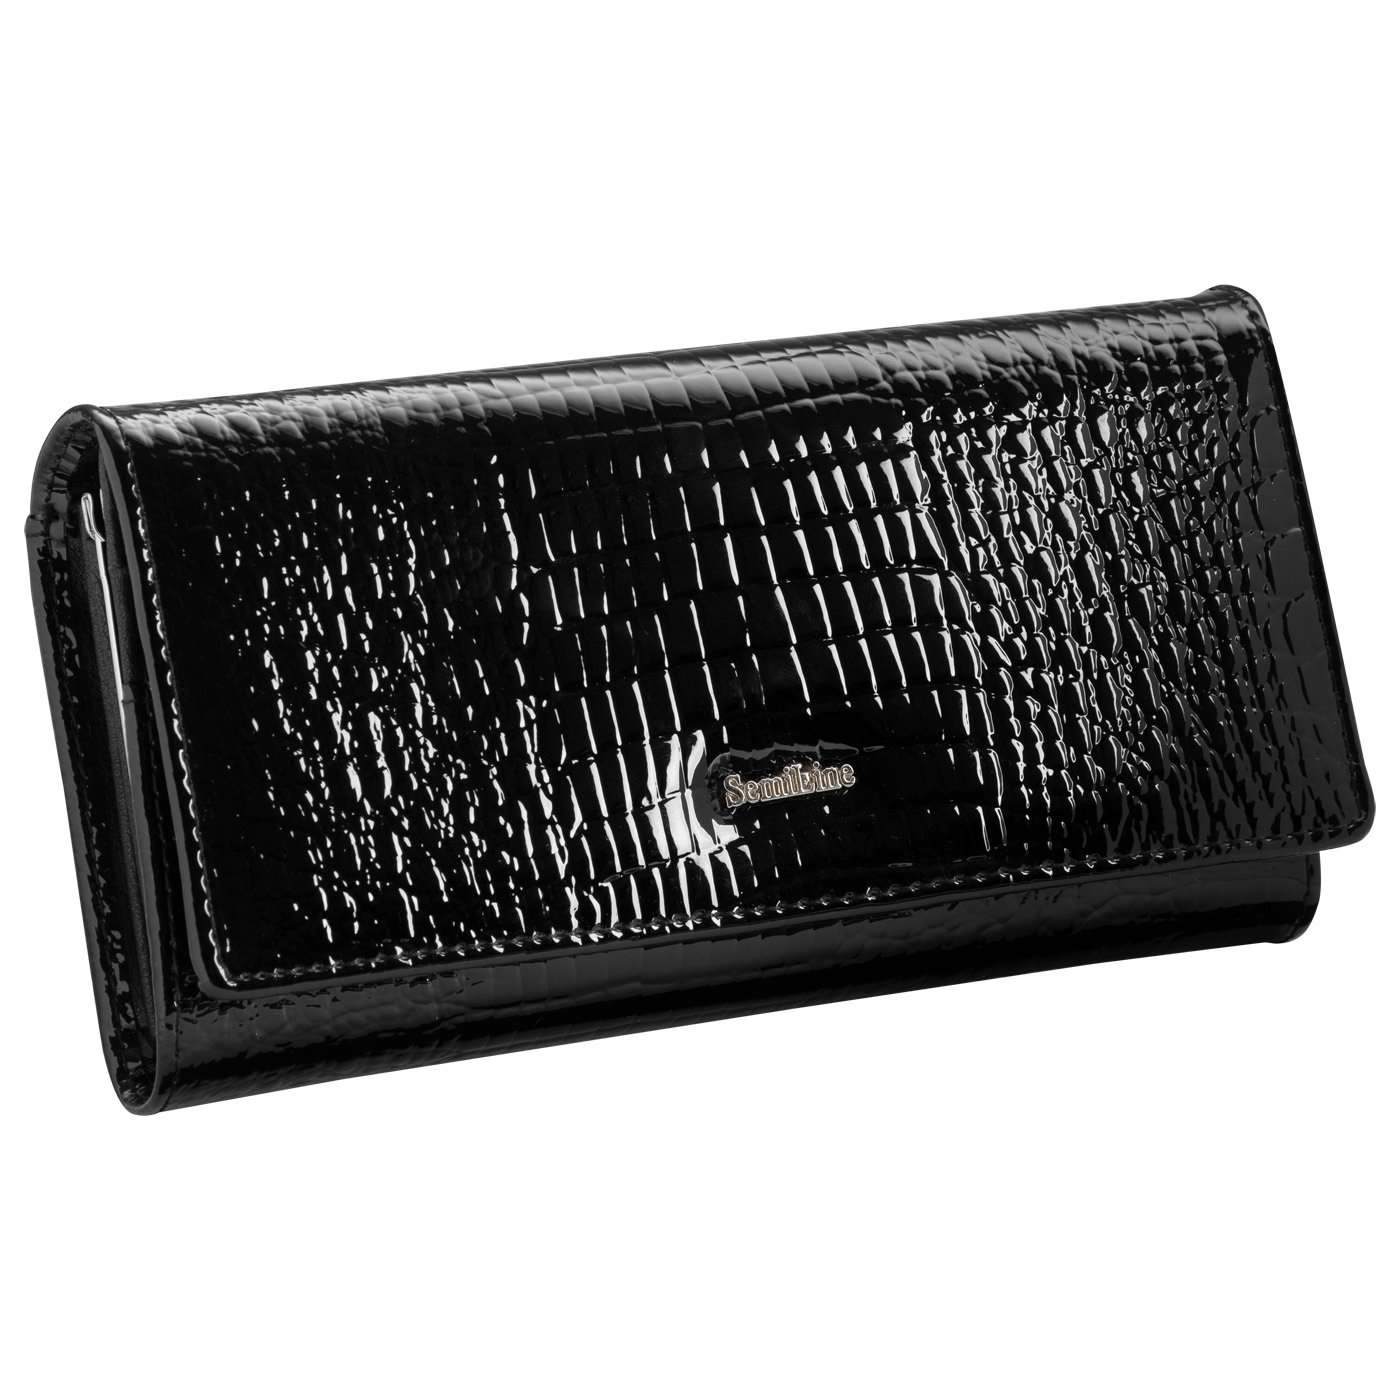 Semiline Woman's RFID Leather Wallet